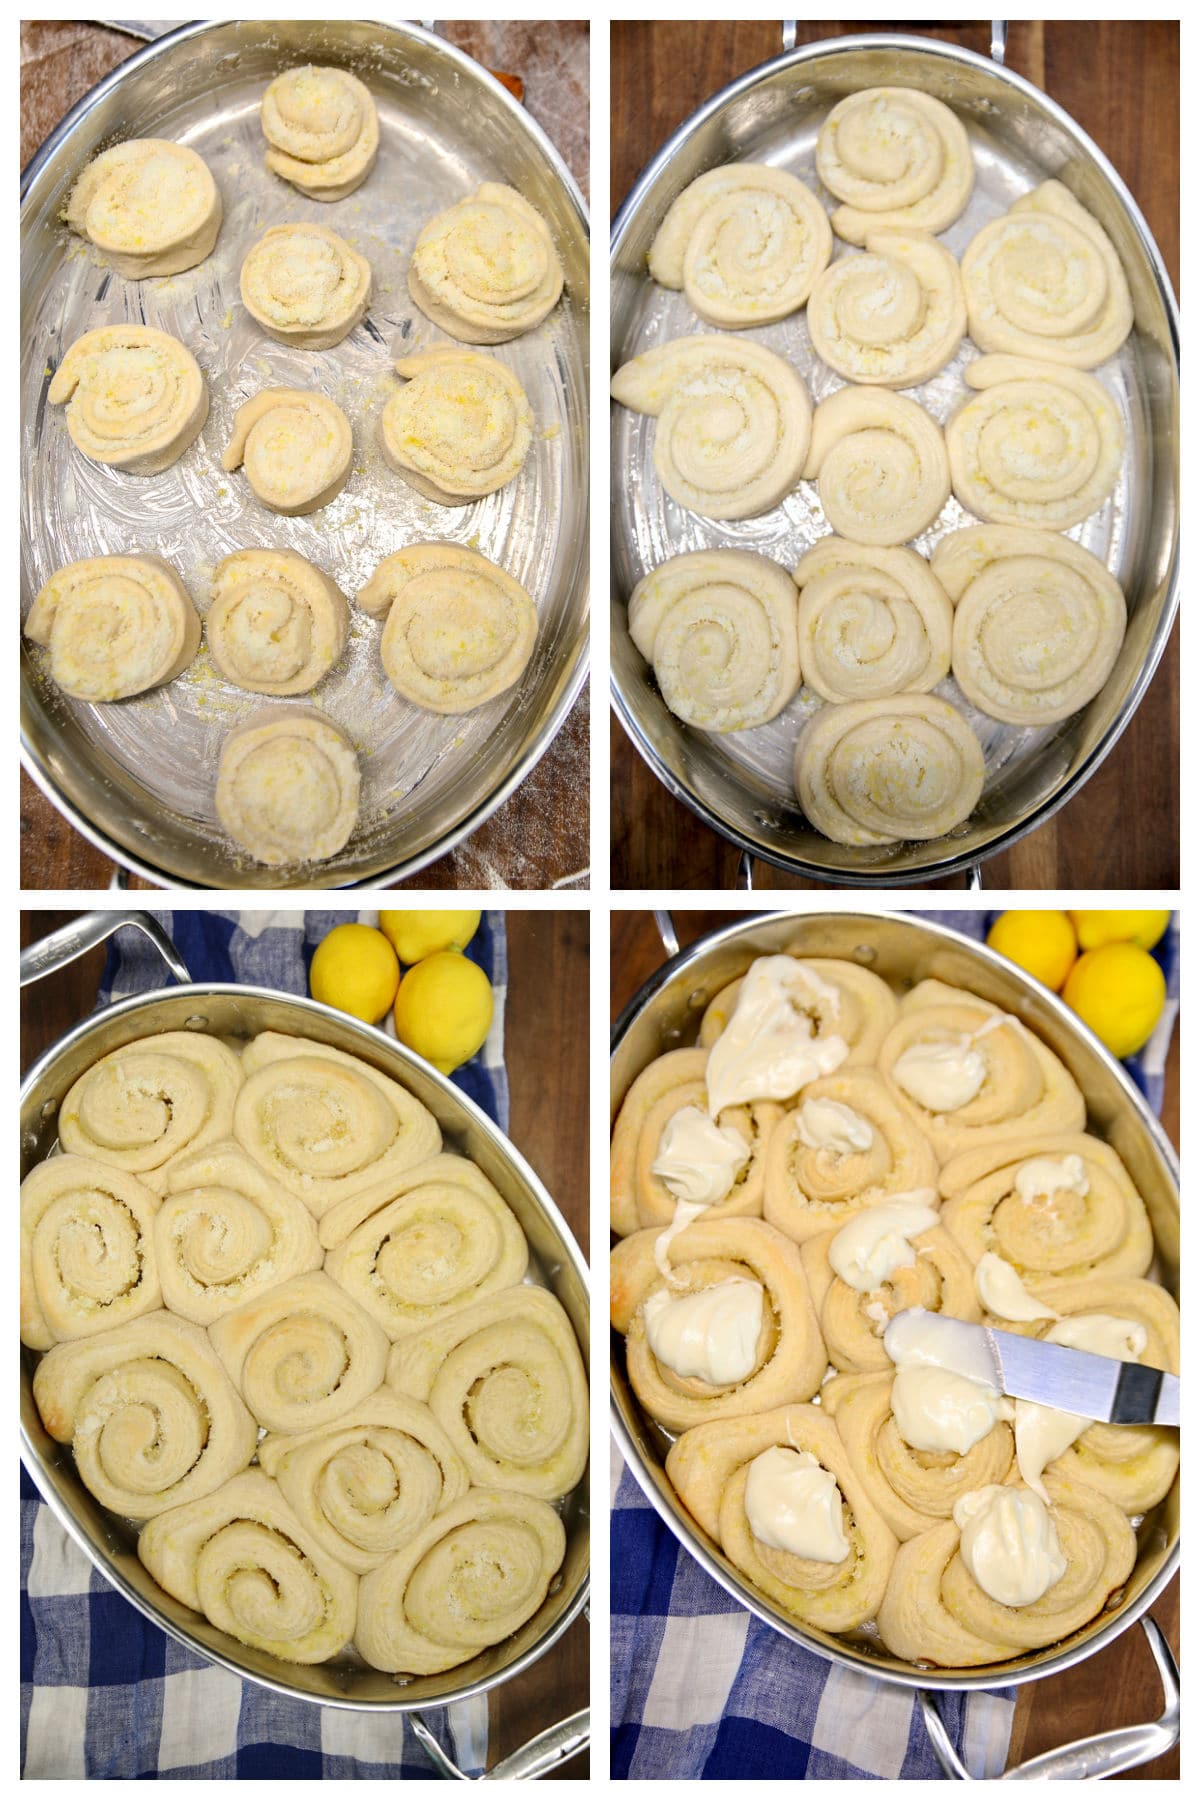 Baking lemon sweet rolls, topping with cream cheese icing - collage.